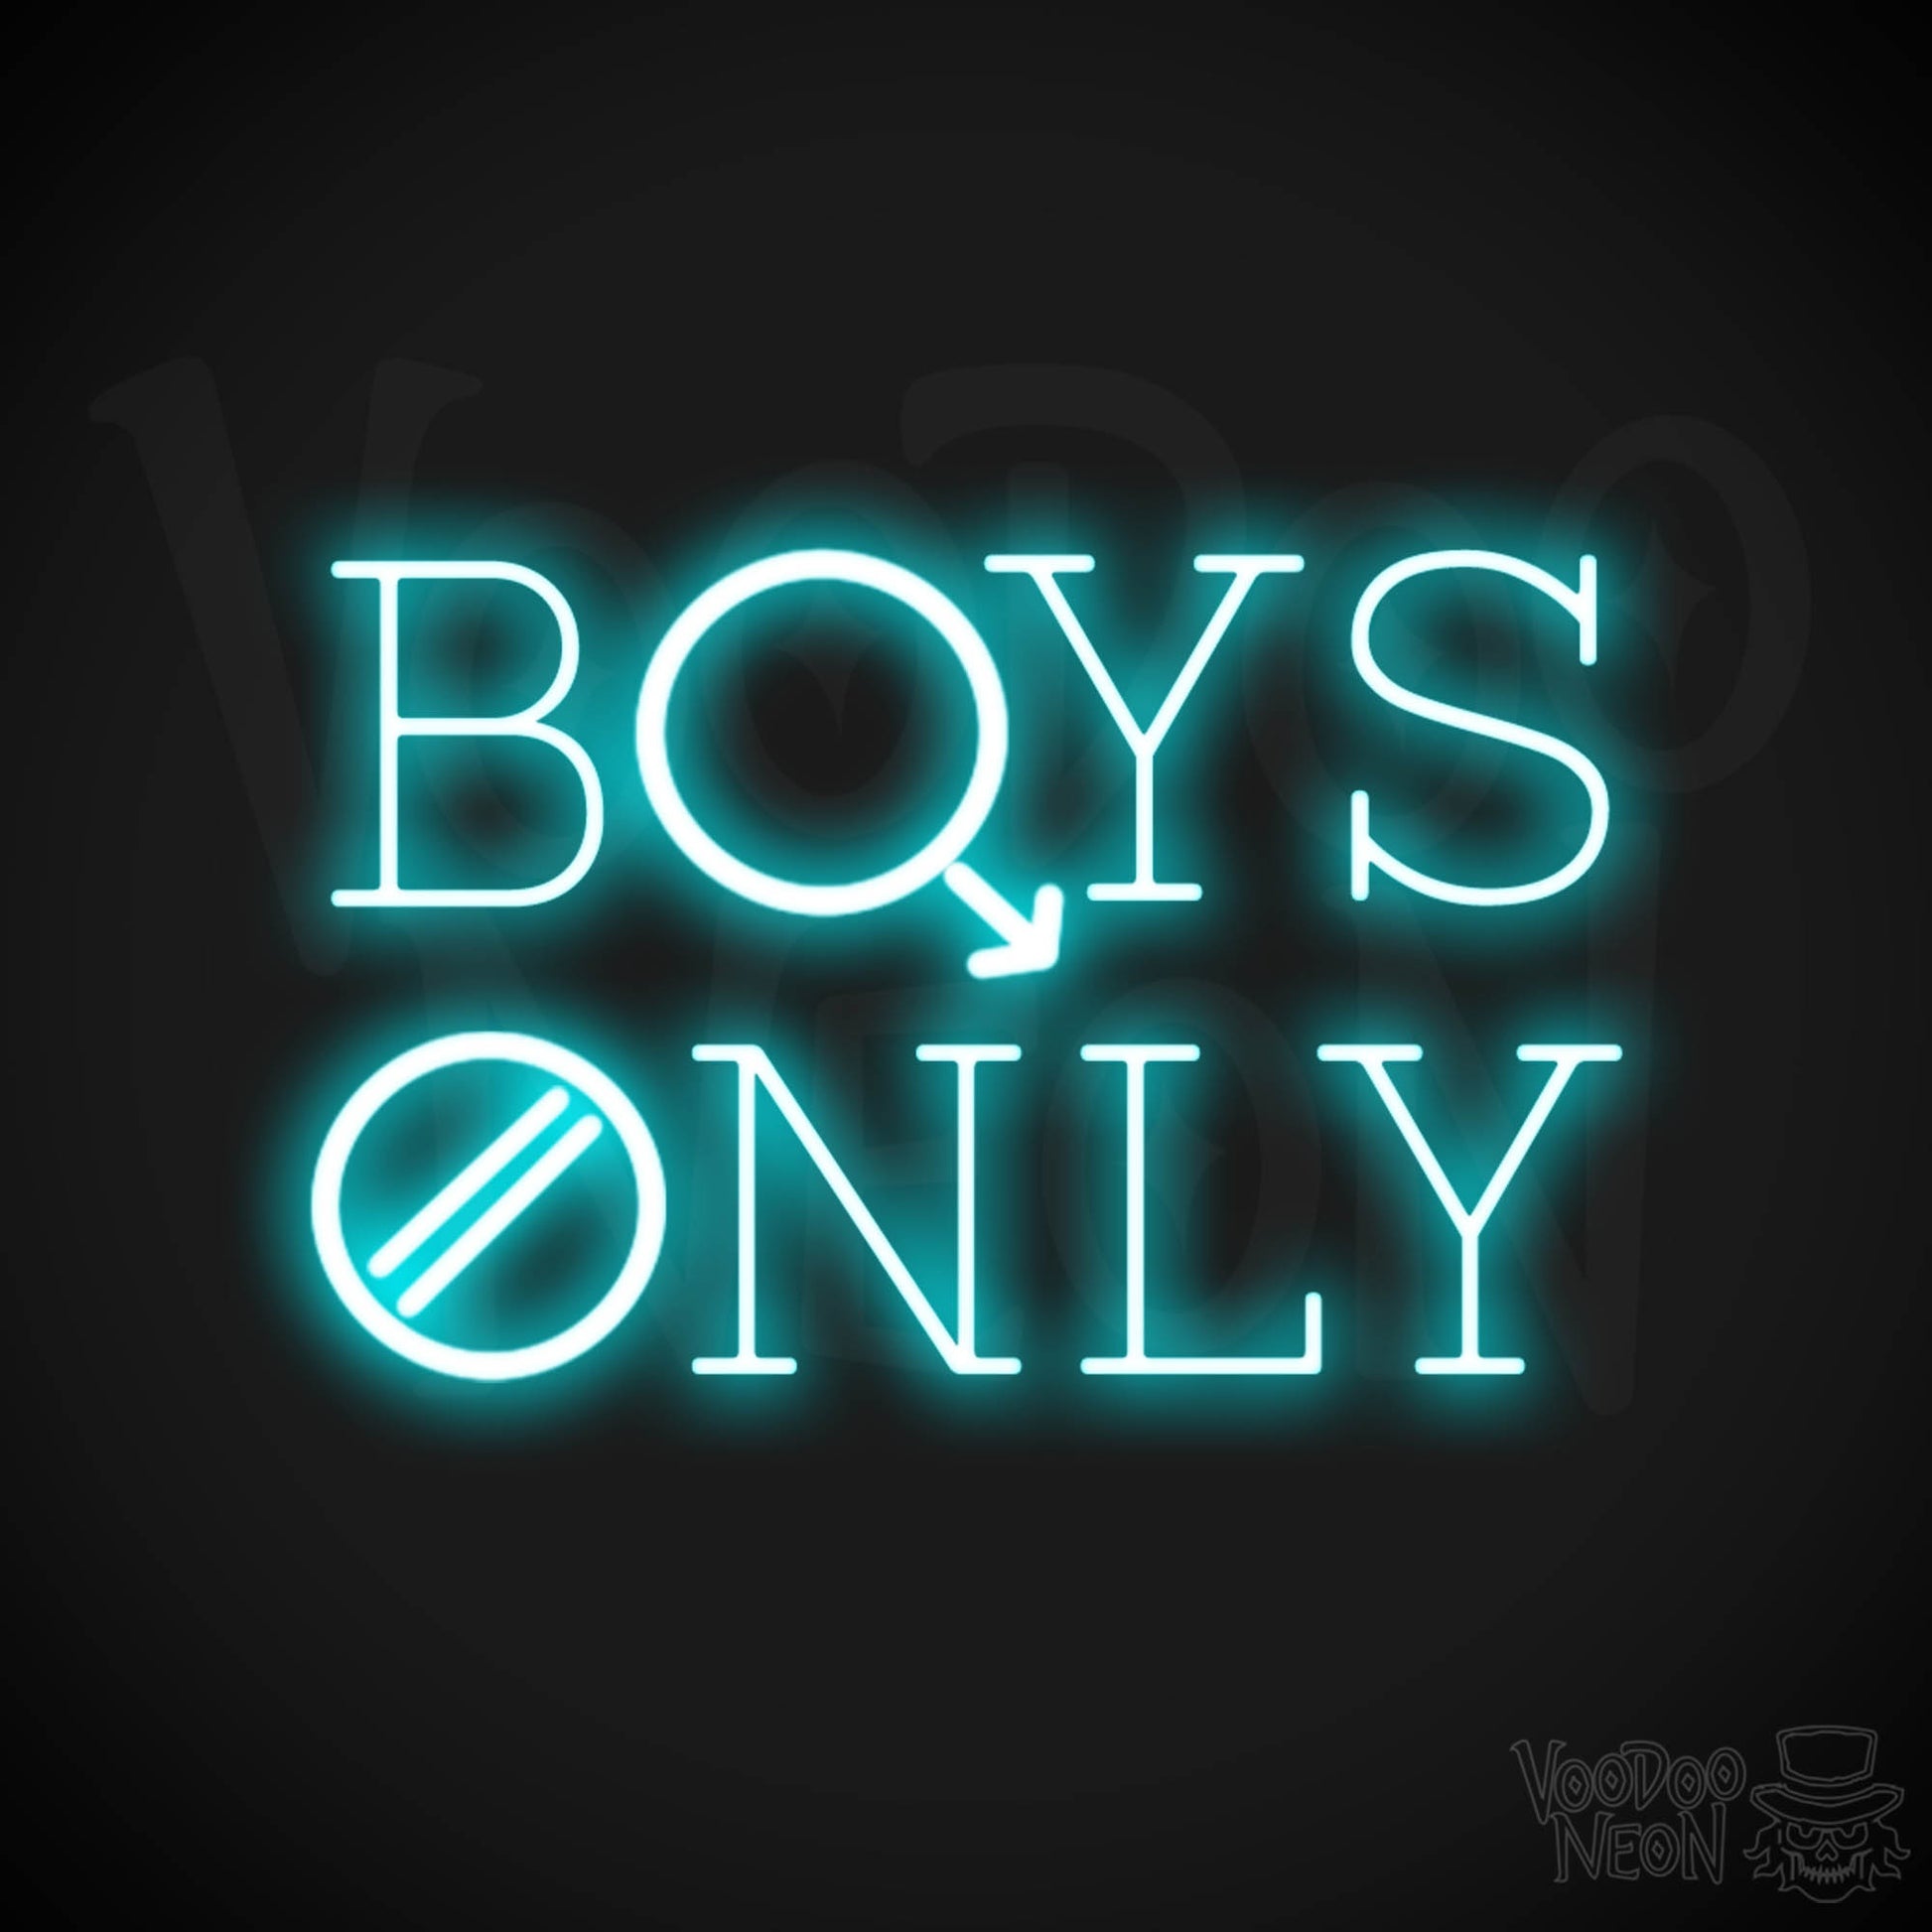 Boys Only * Blue Neon Lights for Bedroom